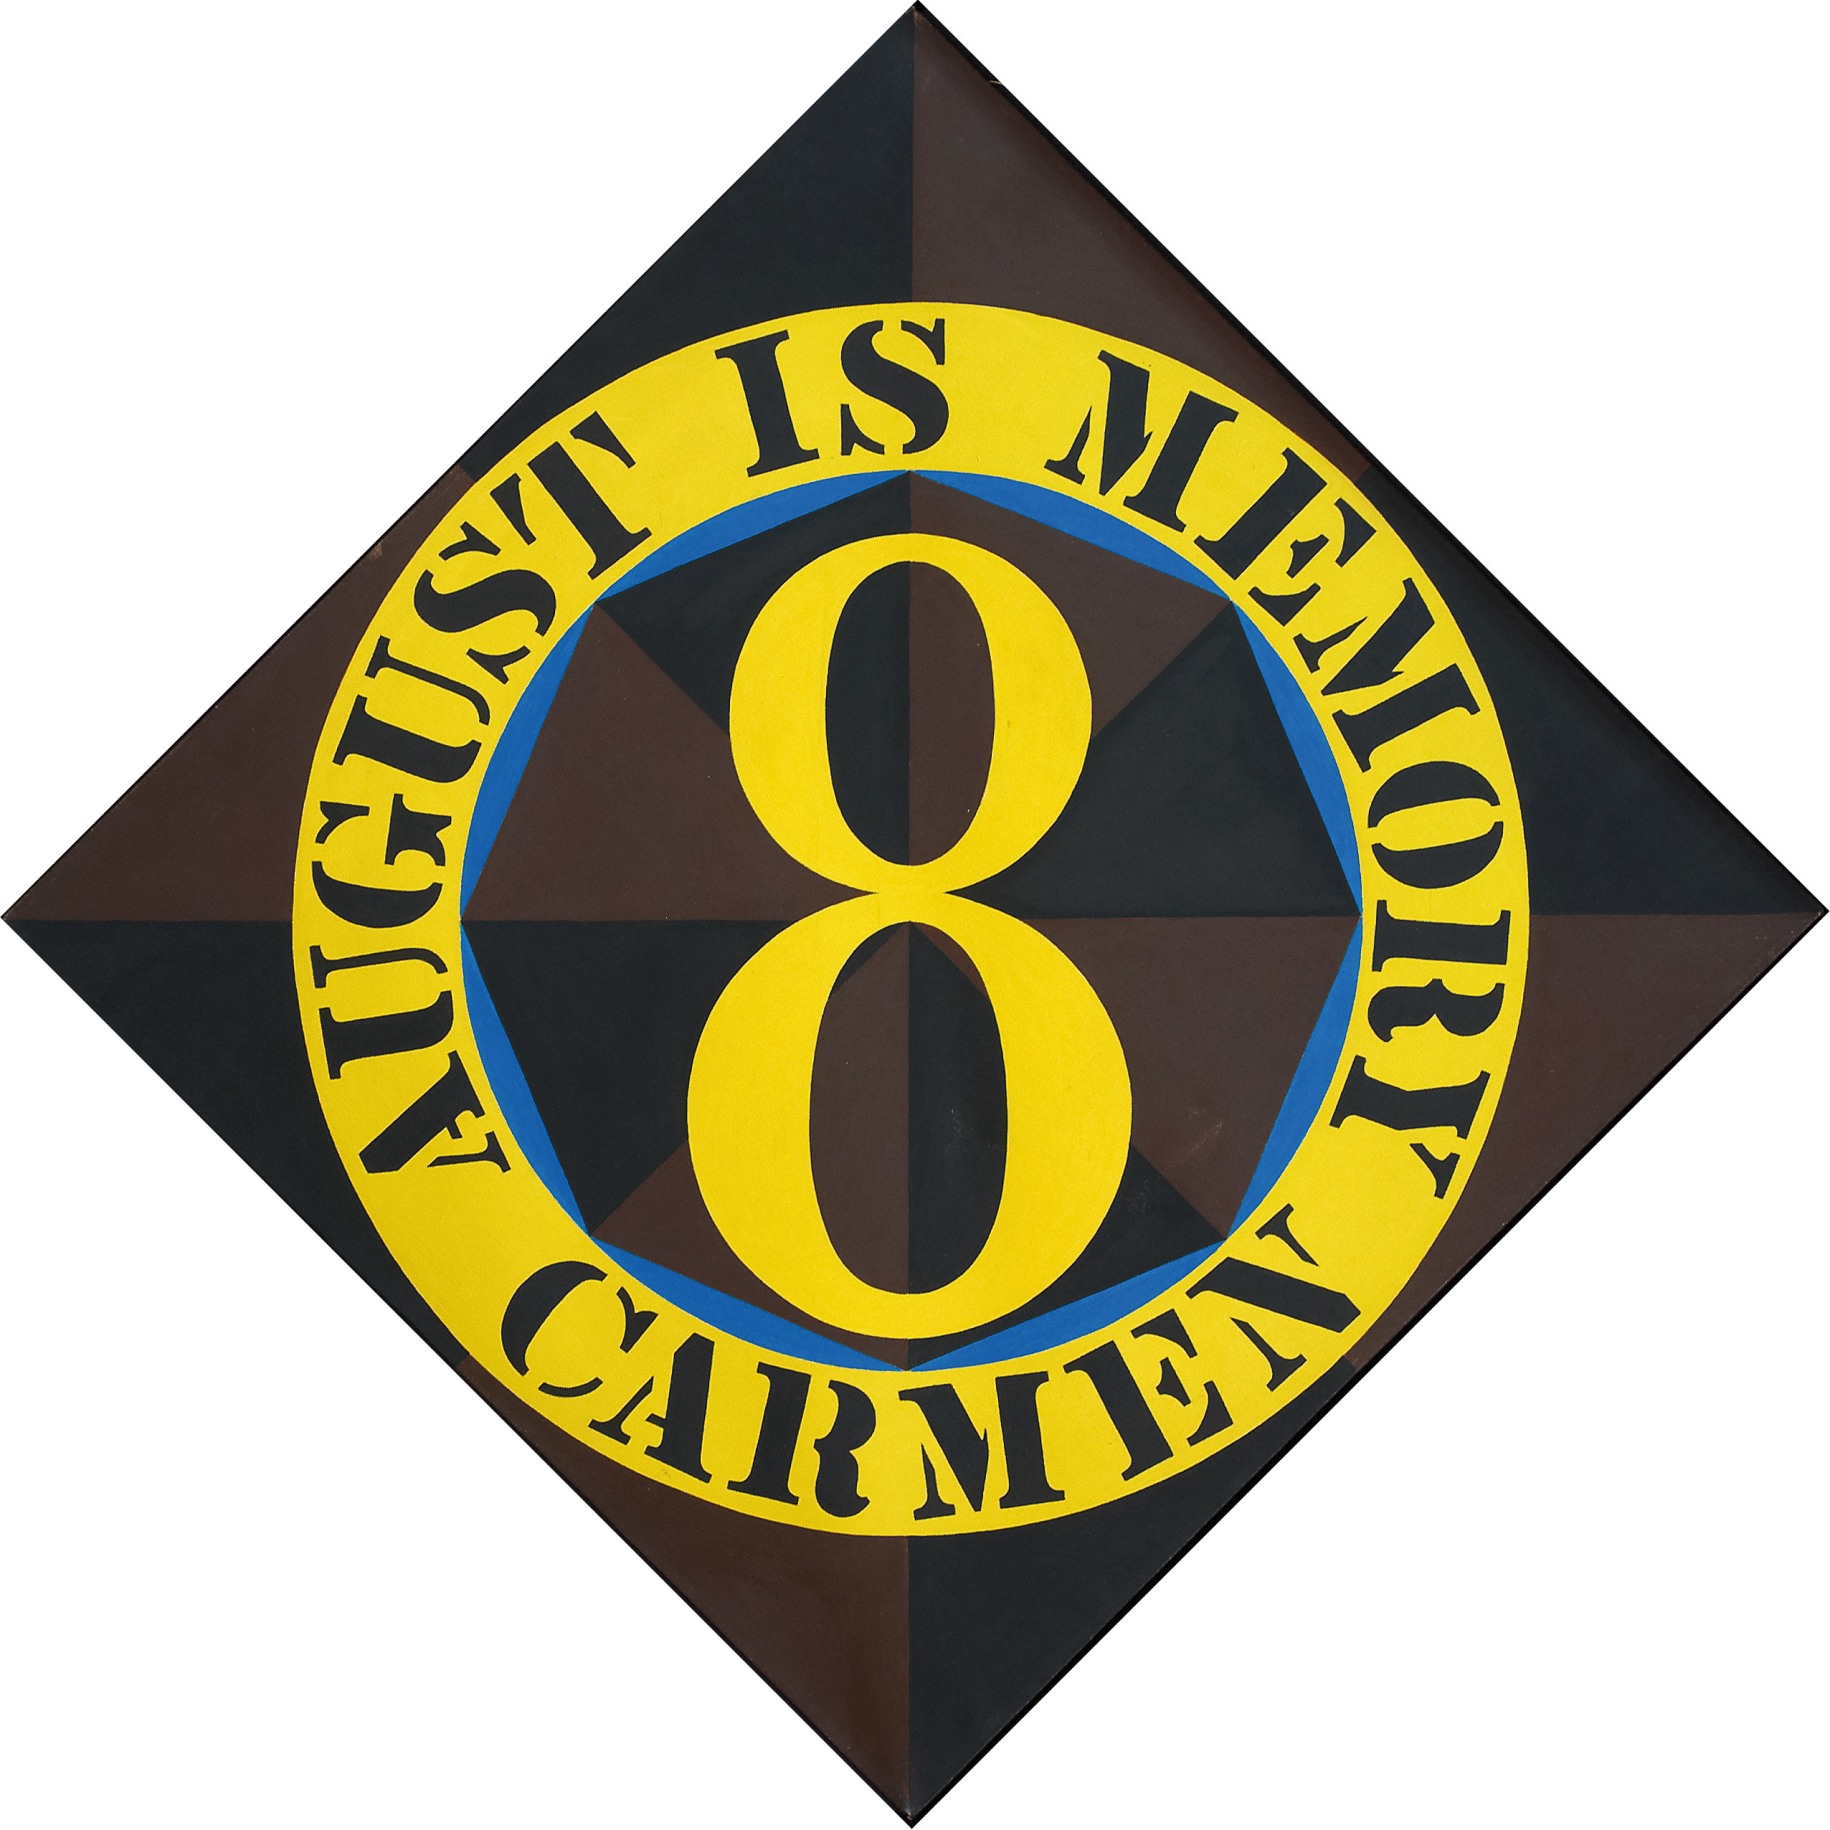 August Is Memory Carmen, a 34 by 34 inch diamond canvas. The background is divided into eight even segments, alternating black and dark brown triangles. At the center of the painting is a yellow numeral eight in an octagon, outlined in blue. surrounding the octagon is a yellow ring with the painted black stenciled text &quot;August Is Memory Carmen.&quot;